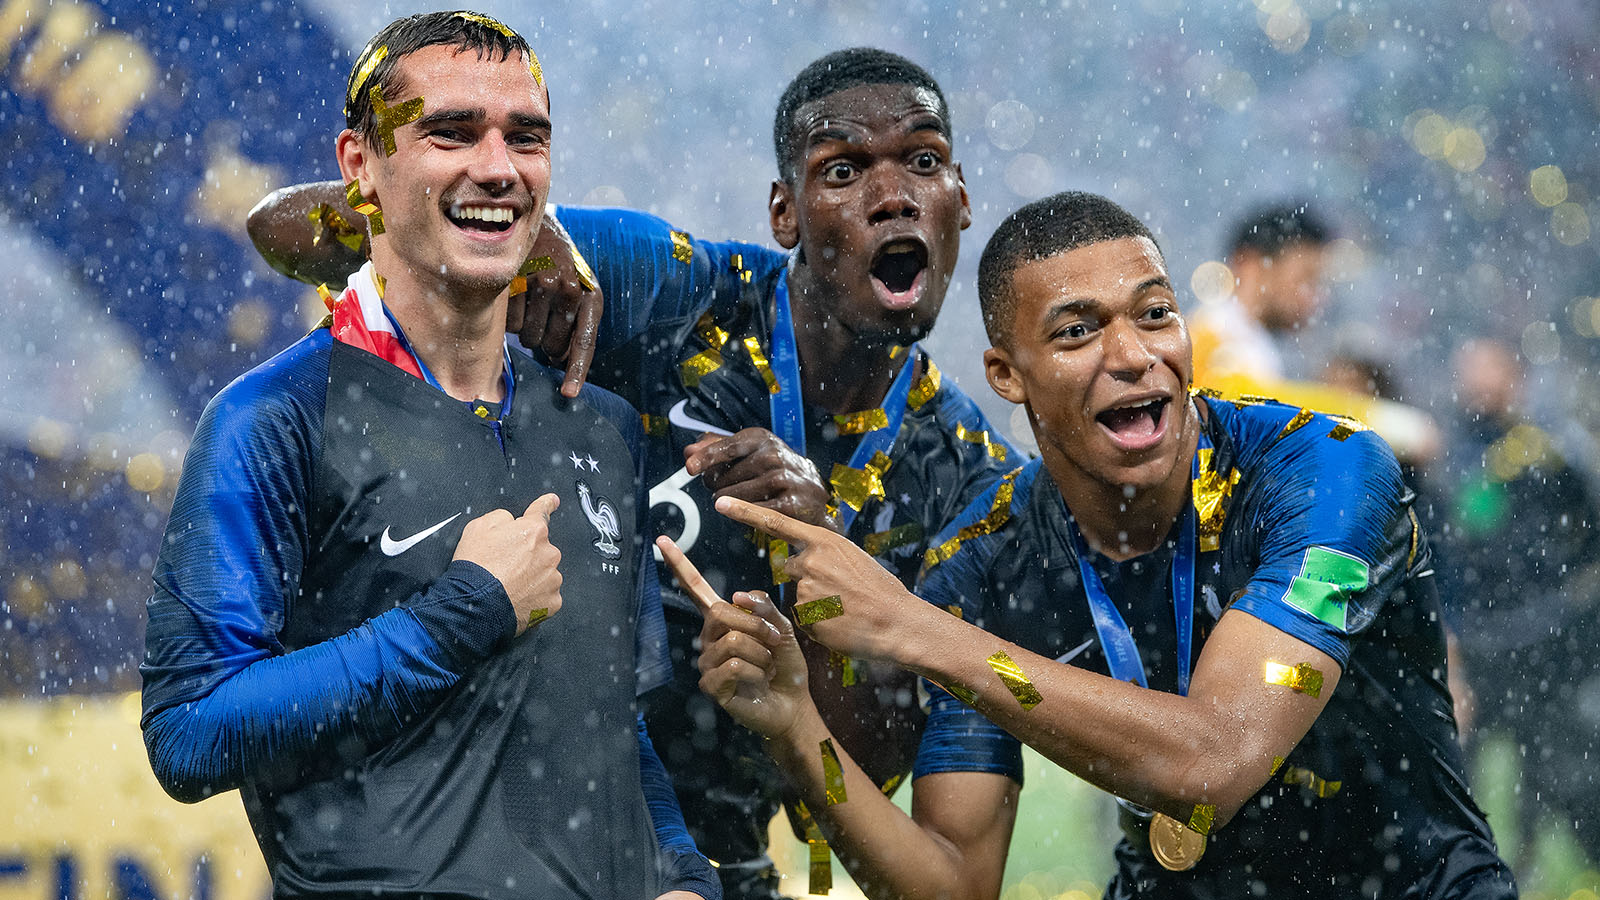 Antoine Griezmann, Paul Pogba, and Kylian Mbappe of France celebrate winning 2018 world cup